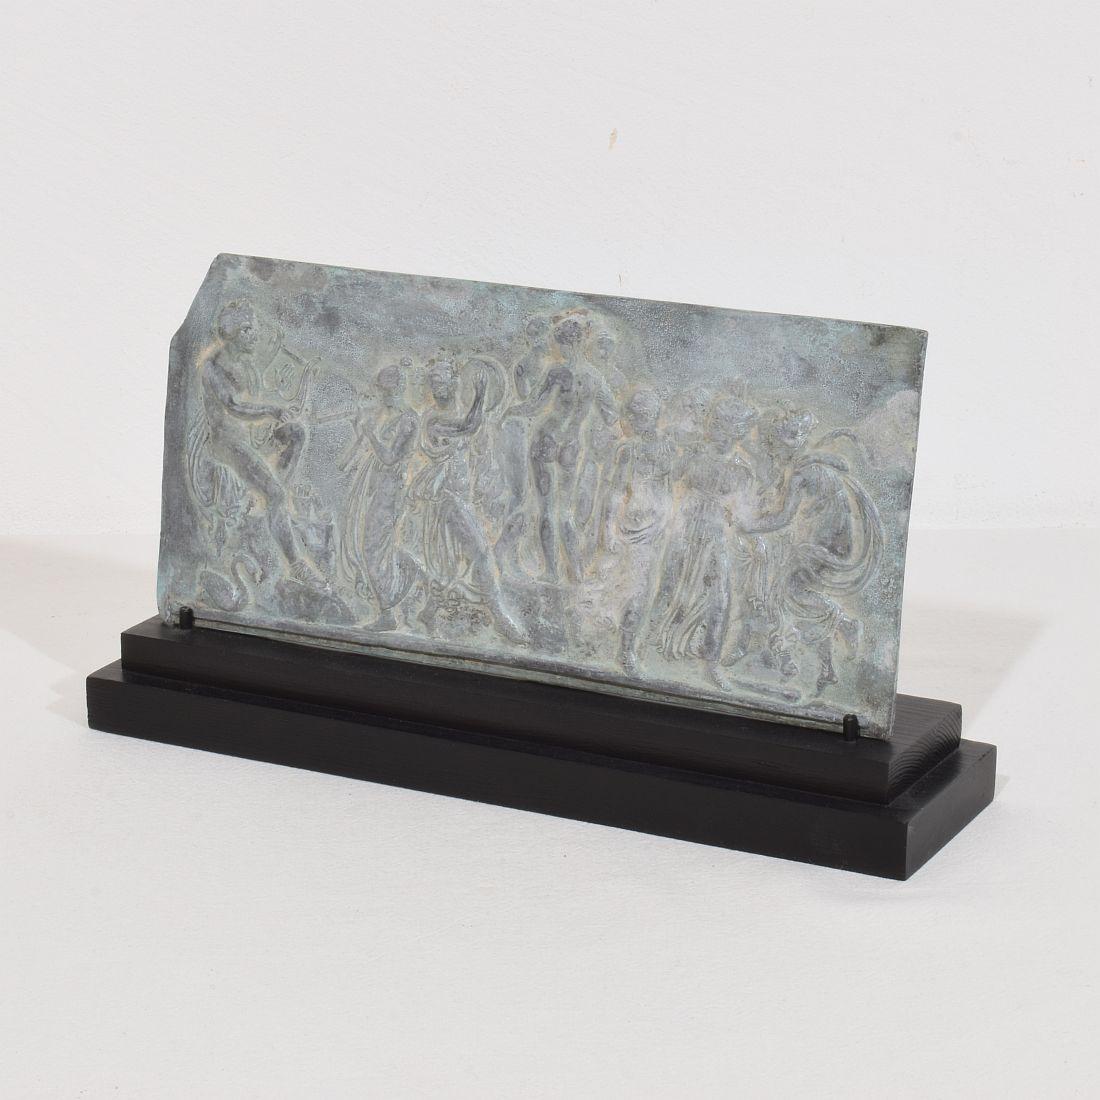 Gorgeous and beautiful weathered small pewter treasure. Great and rare pewter panel depicting a neoclassical scene.
France circa 1780
Weathered and small losses.
measurements include the wooden base.